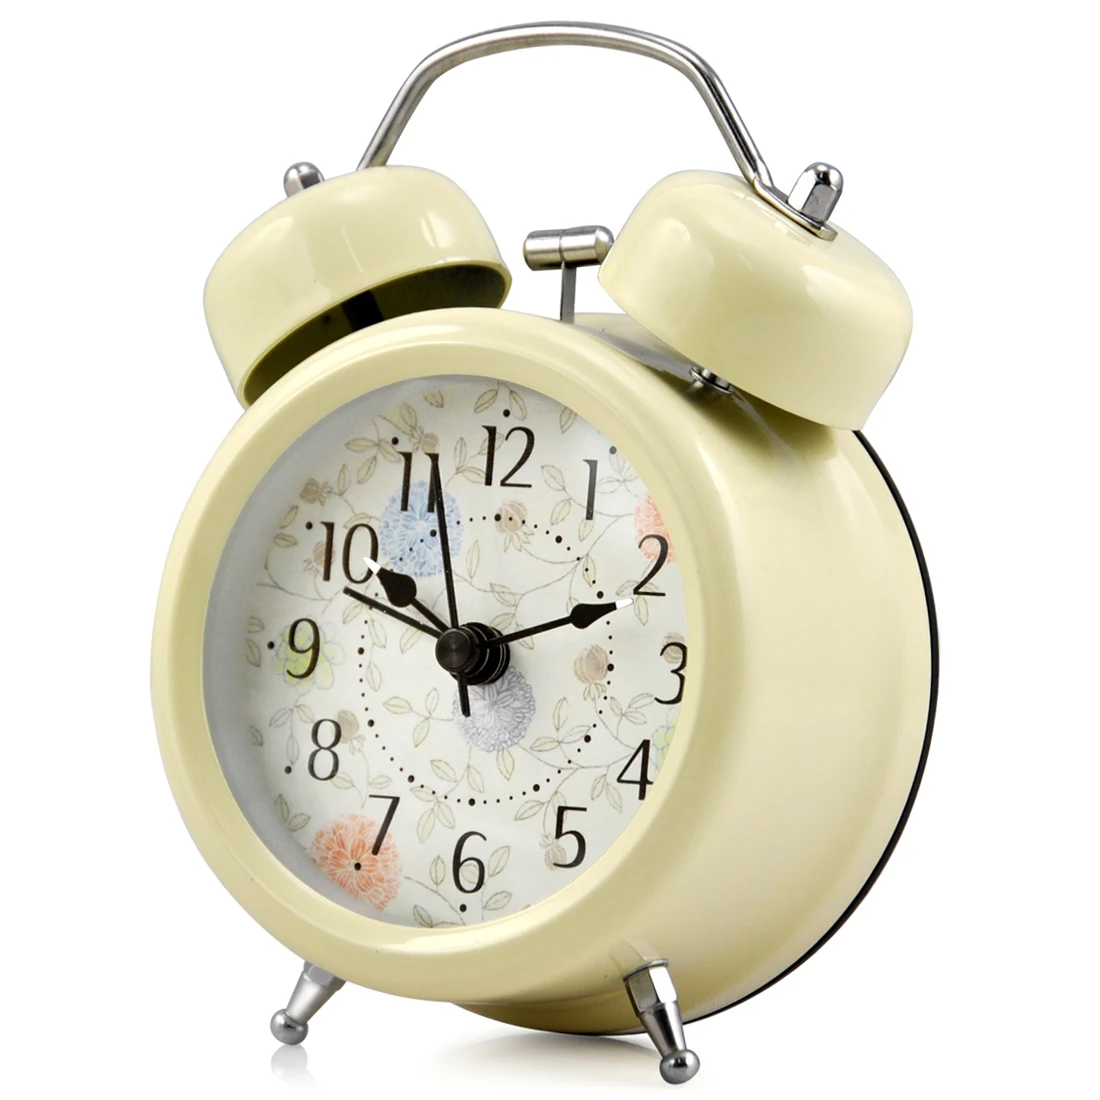 RETRO STYLE DOUBLE BELL ALARM CLOCK TRADITIONAL BEDSIDE LOUD WITH LIGHT ...